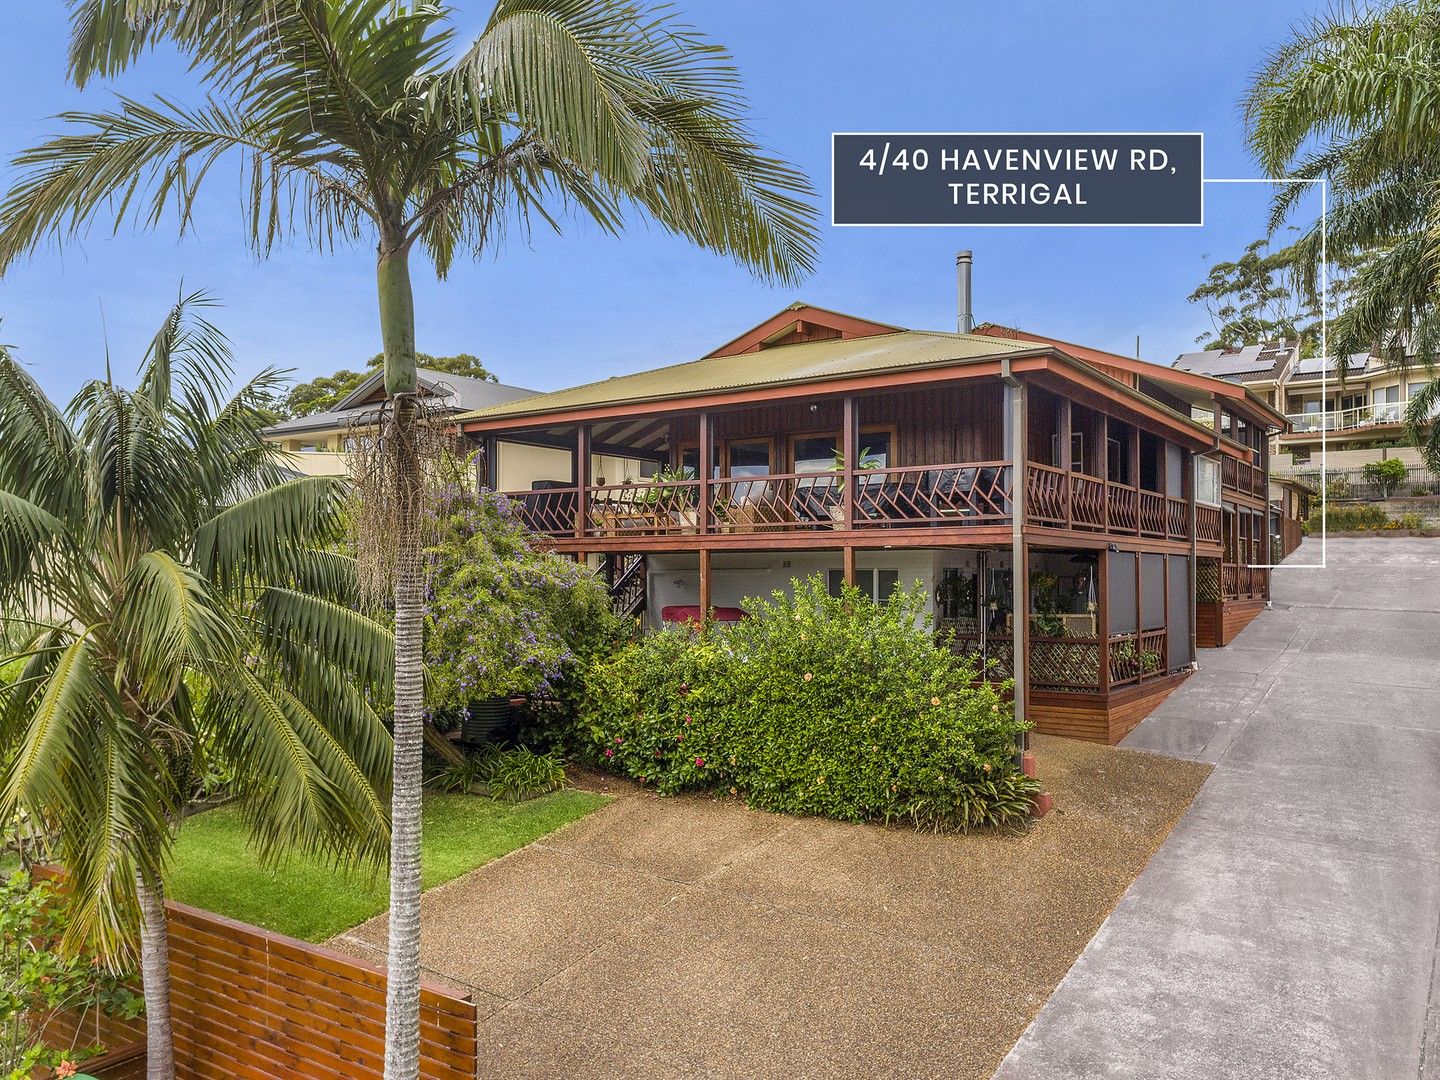 4/40 Havenview Road, Terrigal NSW 2260, Image 0